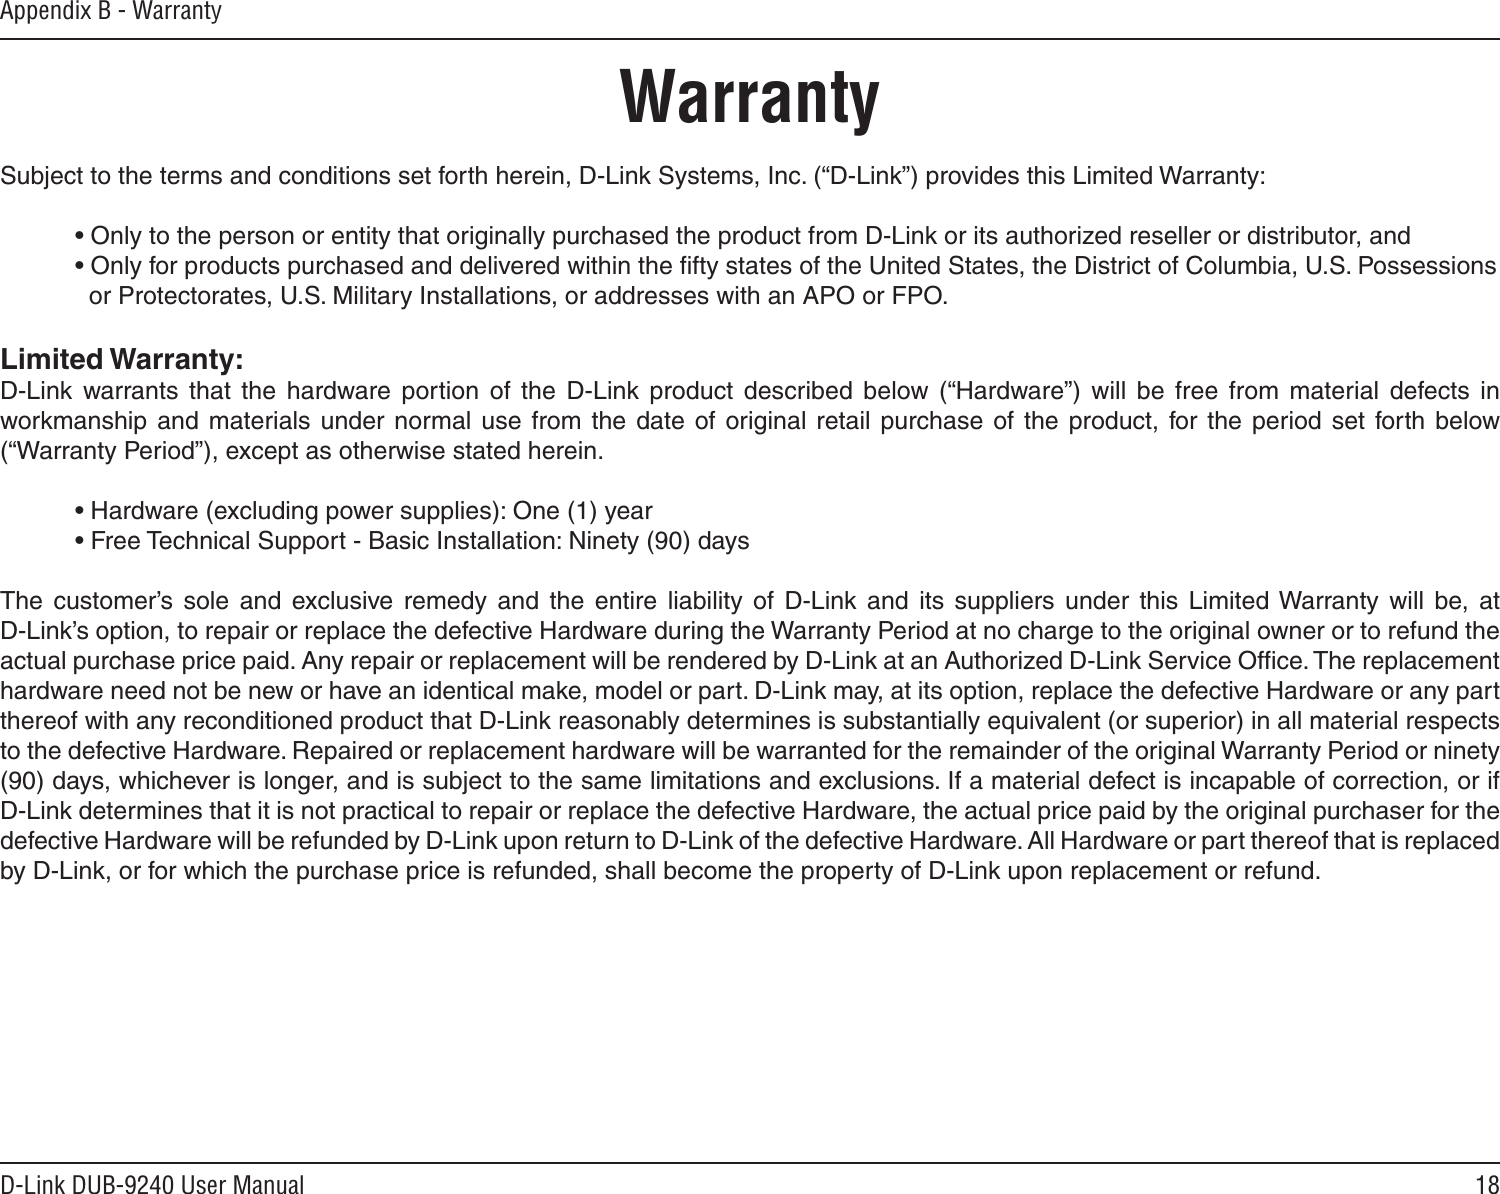 18D-Link DUB-9240 User ManualAppendix B - WarrantyWarrantySubject to the terms and conditions set forth herein, D-Link Systems, Inc. (“D-Link”) provides this Limited Warranty:  • Only to the person or entity that originally purchased the product from D-Link or its authorized reseller or distributor, and  • Only for products purchased and delivered within the ﬁfty states of the United States, the District of Columbia, U.S. Possessions      or Protectorates, U.S. Military Installations, or addresses with an APO or FPO.Limited Warranty:D-Link  warrants that  the  hardware  portion  of  the  D-Link  product  described  below  (“Hardware”)  will  be  free  from  material  defects  in workmanship  and  materials  under normal  use  from  the  date  of  original  retail  purchase  of  the  product, for the  period  set  forth  below (“Warranty Period”), except as otherwise stated herein.  • Hardware (excluding power supplies): One (1) year  • Free Technical Support - Basic Installation: Ninety (90) daysThe  customer’s  sole  and  exclusive  remedy  and  the  entire  liability  of  D-Link  and  its  suppliers  under  this  Limited Warranty  will  be,  at  D-Link’s option, to repair or replace the defective Hardware during the Warranty Period at no charge to the original owner or to refund the actual purchase price paid. Any repair or replacement will be rendered by D-Link at an Authorized D-Link Service Ofﬁce. The replacement hardware need not be new or have an identical make, model or part. D-Link may, at its option, replace the defective Hardware or any part thereof with any reconditioned product that D-Link reasonably determines is substantially equivalent (or superior) in all material respects to the defective Hardware. Repaired or replacement hardware will be warranted for the remainder of the original Warranty Period or ninety (90) days, whichever is longer, and is subject to the same limitations and exclusions. If a material defect is incapable of correction, or if D-Link determines that it is not practical to repair or replace the defective Hardware, the actual price paid by the original purchaser for the defective Hardware will be refunded by D-Link upon return to D-Link of the defective Hardware. All Hardware or part thereof that is replaced by D-Link, or for which the purchase price is refunded, shall become the property of D-Link upon replacement or refund.